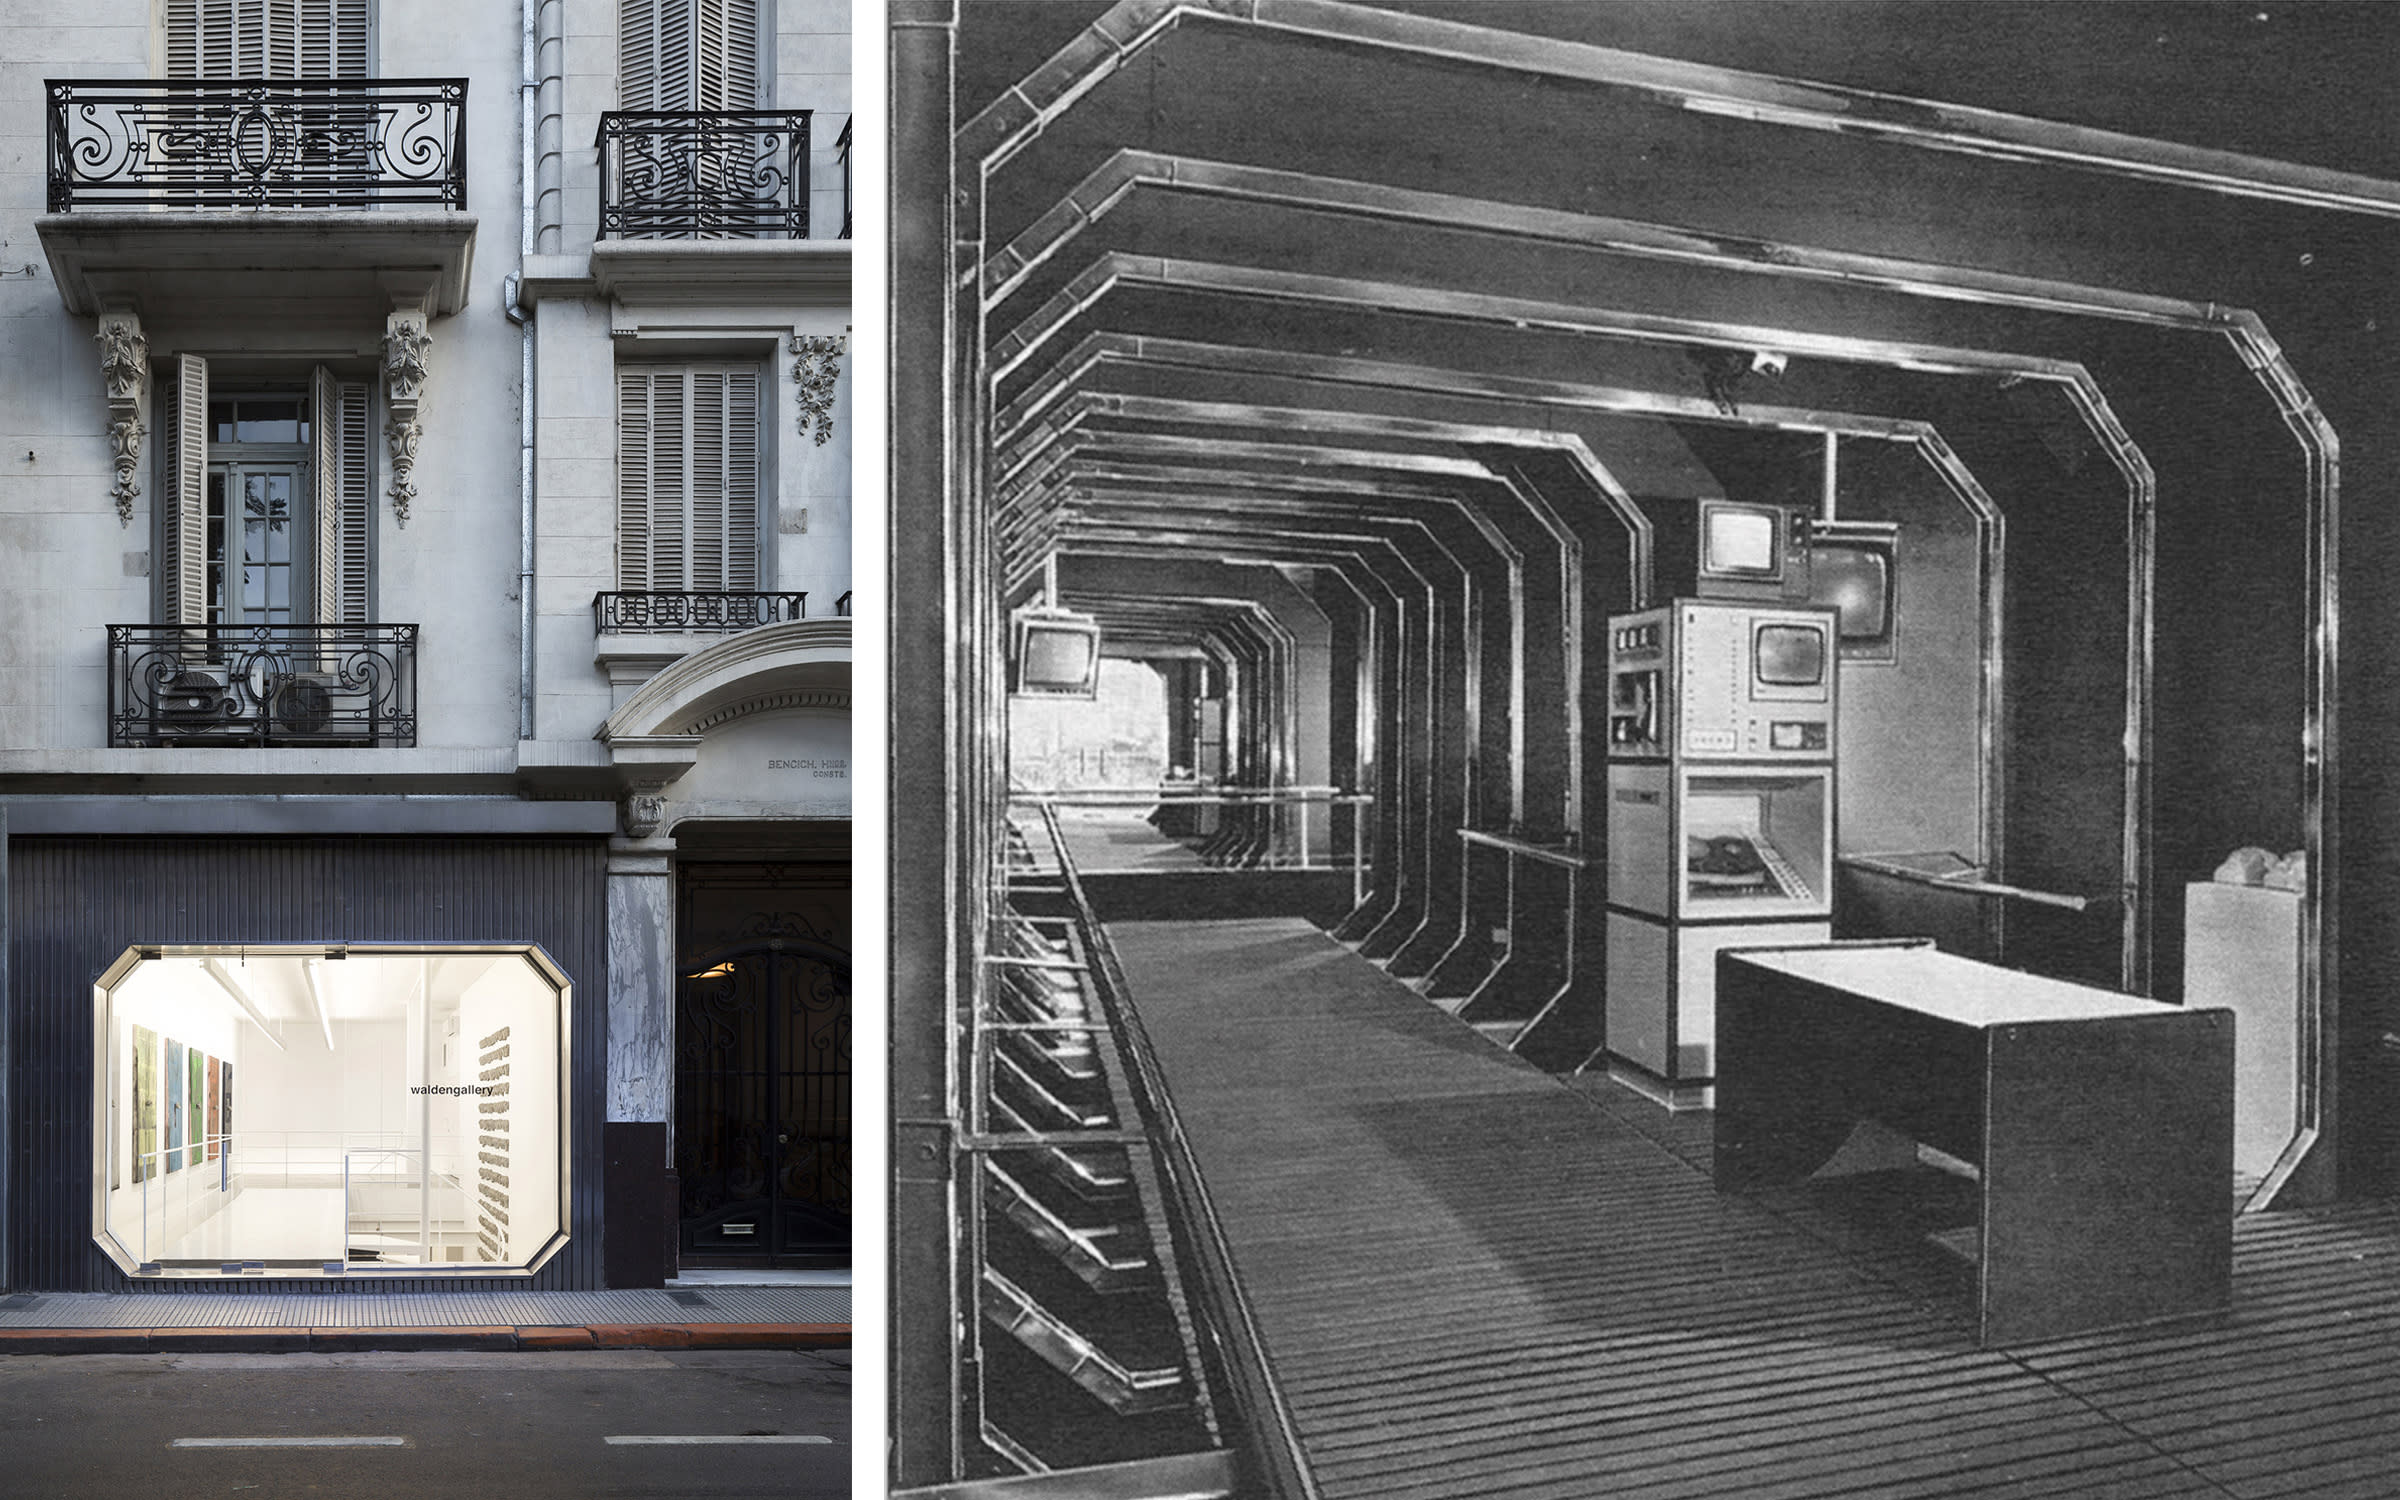 Now and then: waldengallery's distinctive facade in Viamonte street in Buenos Aires, and the original interior as it appeared in 1972, during its heyday as the Centro de Arte y Comunicación. Historian María José Herrera writes that the organization rallied architects, scientists, and artists to ‘work together to try and configure an art that was brand-new, straight from a continent that was waiting to occupy its place in the world order.’ Images courtesy of waldengallery, Buenos Aires.